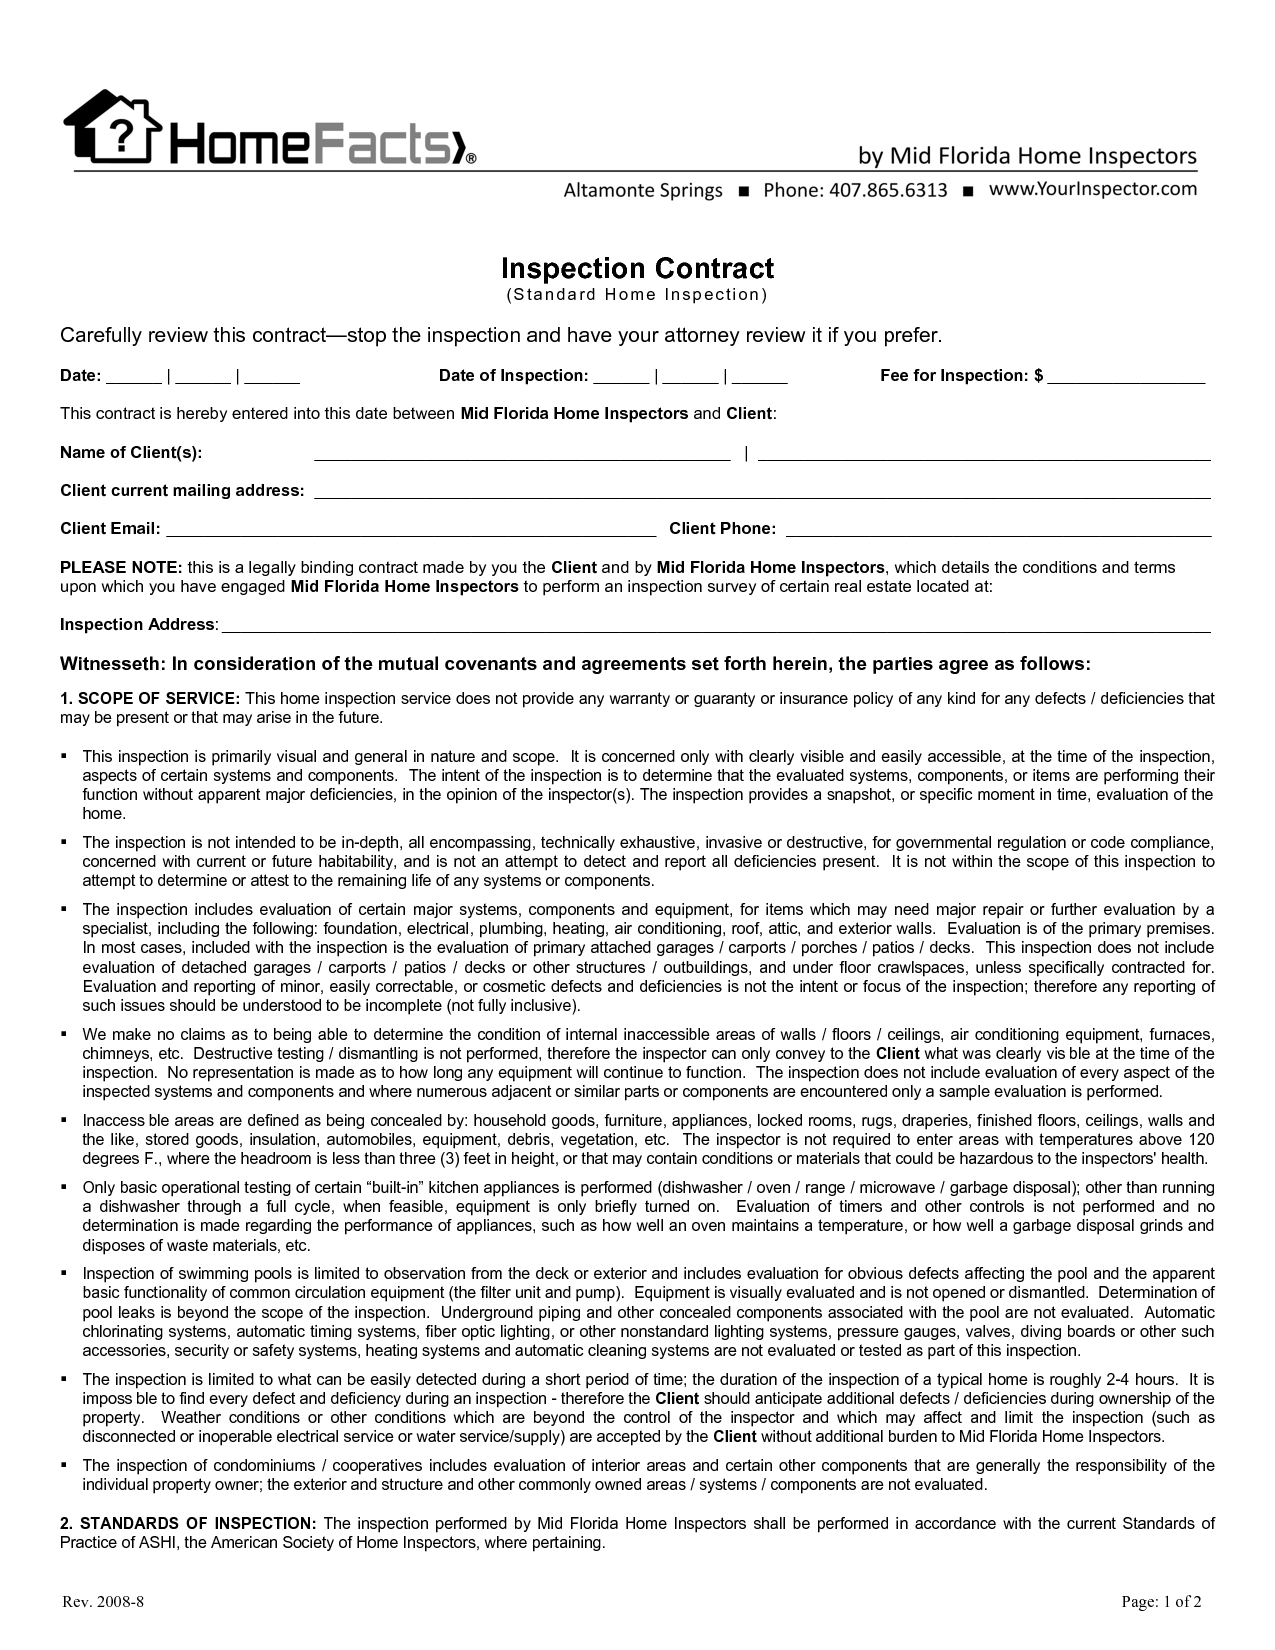 Cleaning Services Contract Agreement - Free Printable Documents intended for Janitorial Contract Agreement